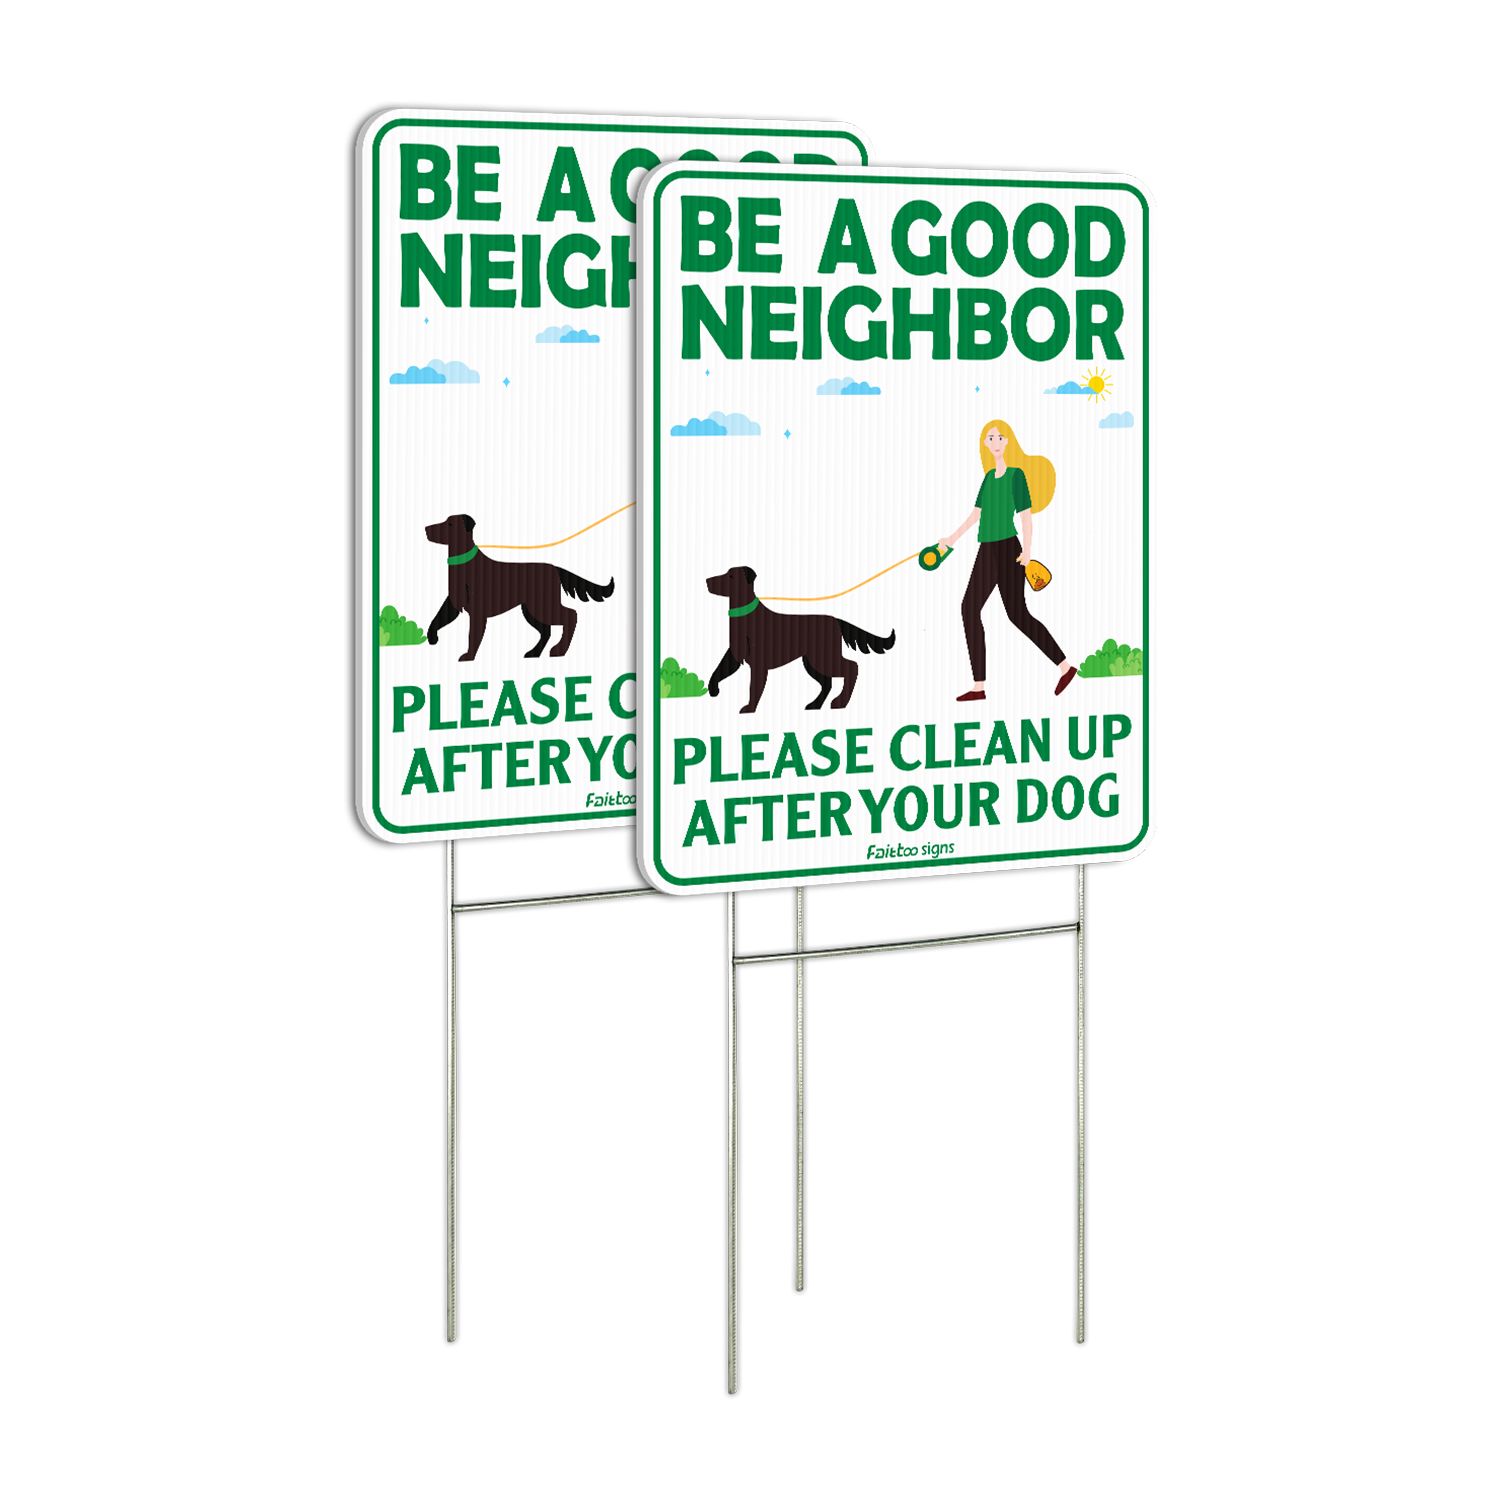 Be a Good Neighbor Clean Up After Your Dog 12 x 9 Inches Yard Sign with Metal Wire H-Stakes, Double Sided, 2-Pack No Pooping Dog Lawn Signs, Waterproof, Weather Resistant, Easy to Mount